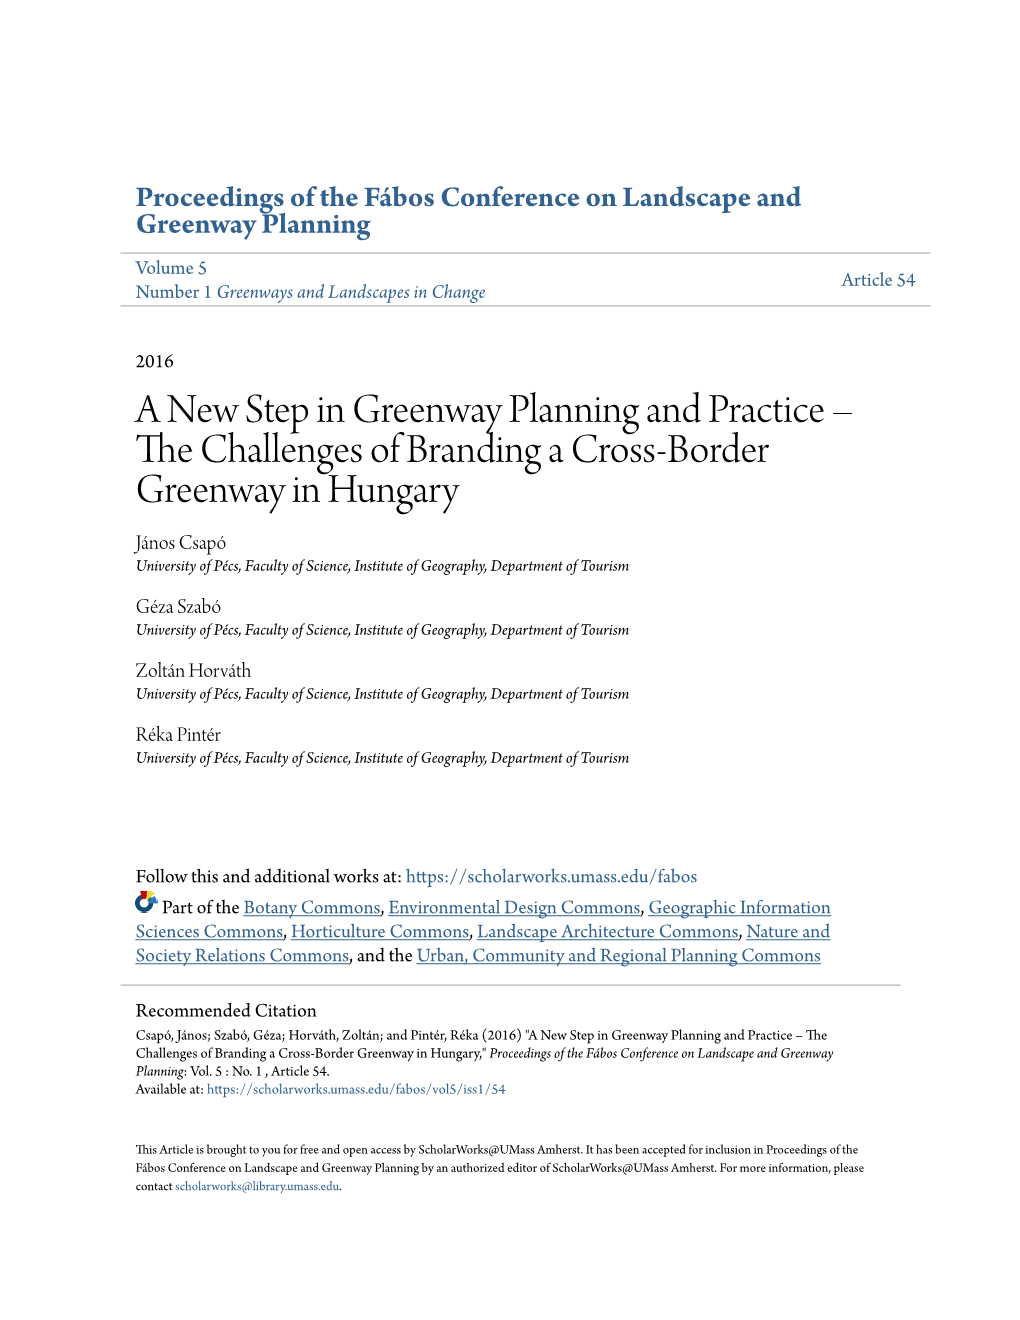 The Challenges of Branding a Cross-Border Greenway in Hungary," Proceedings of the Fábos Conference on Landscape and Greenway Planning: Vol